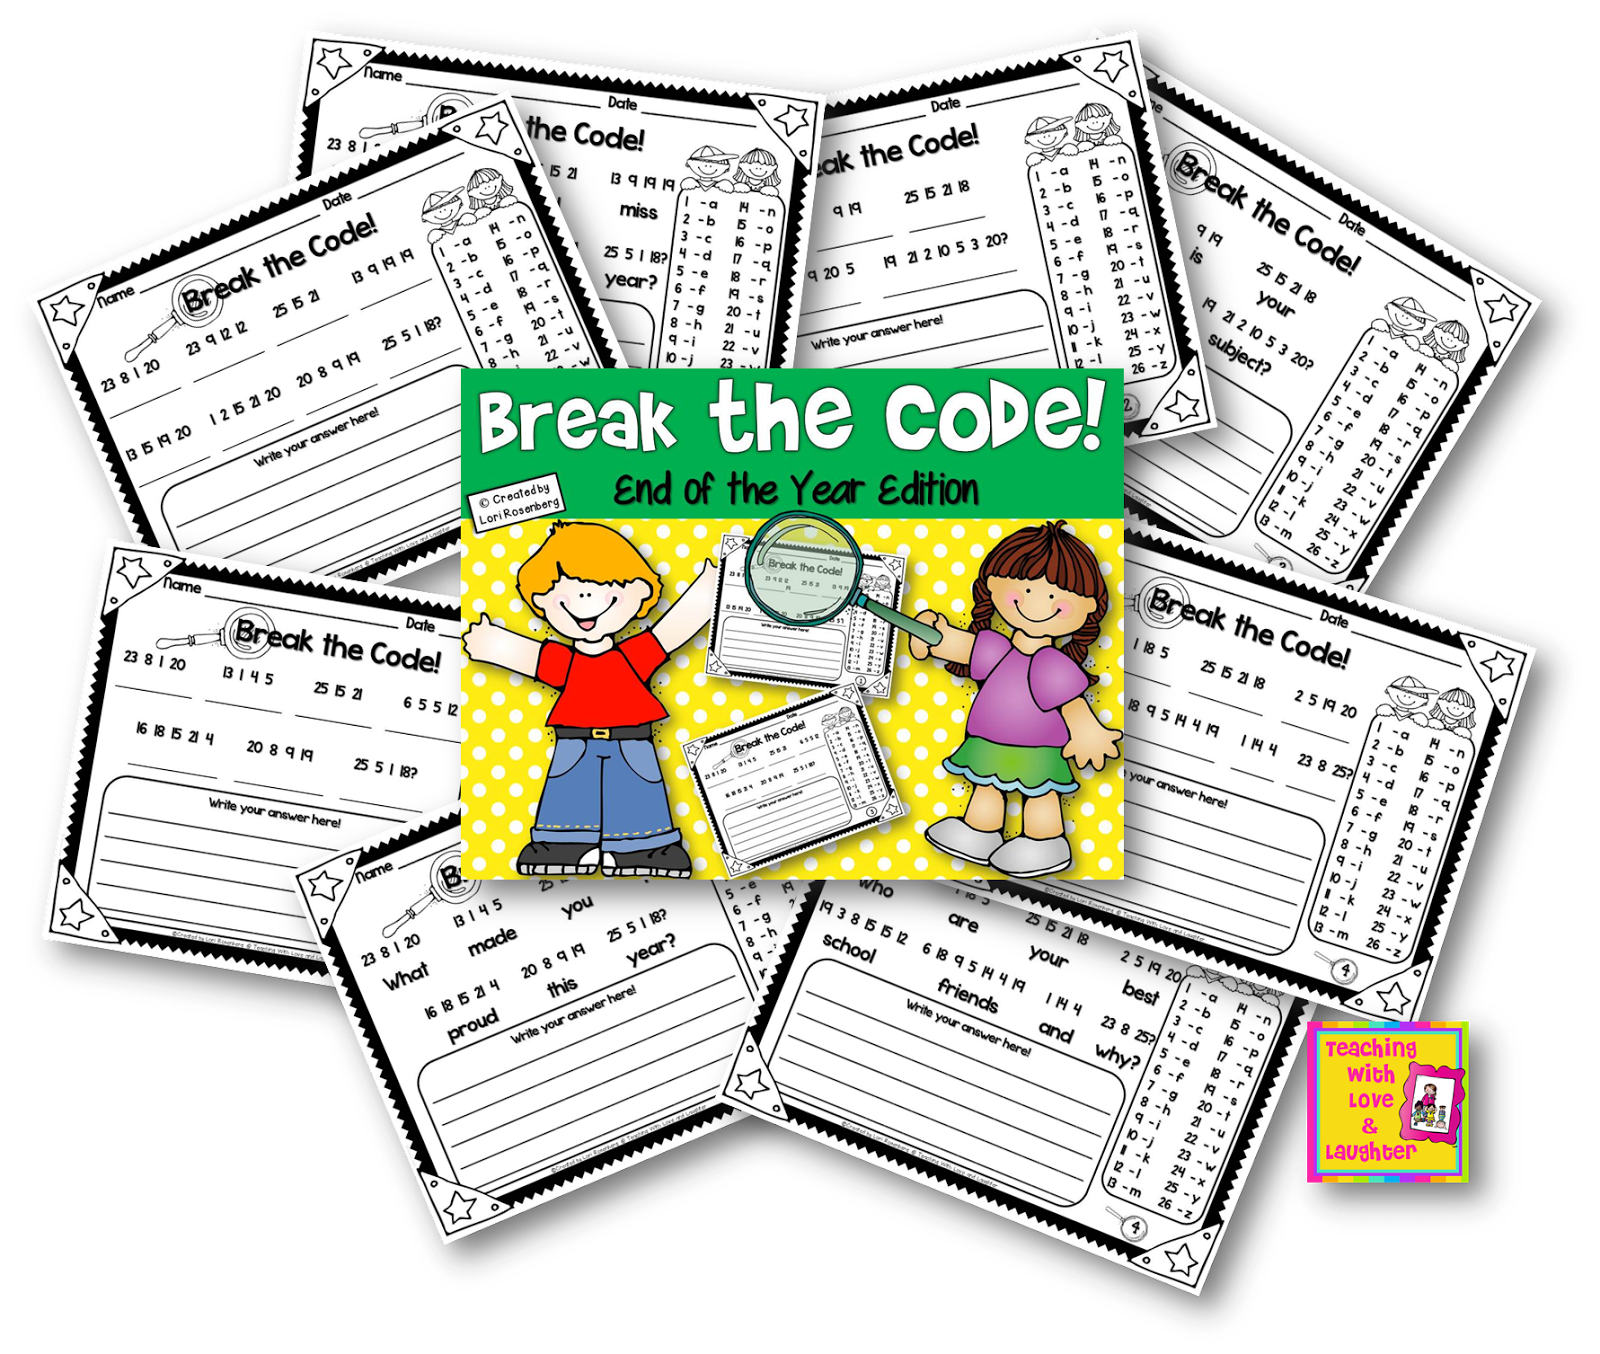 Teaching With Love and Laughter: Rebus Stories and Break the Code!